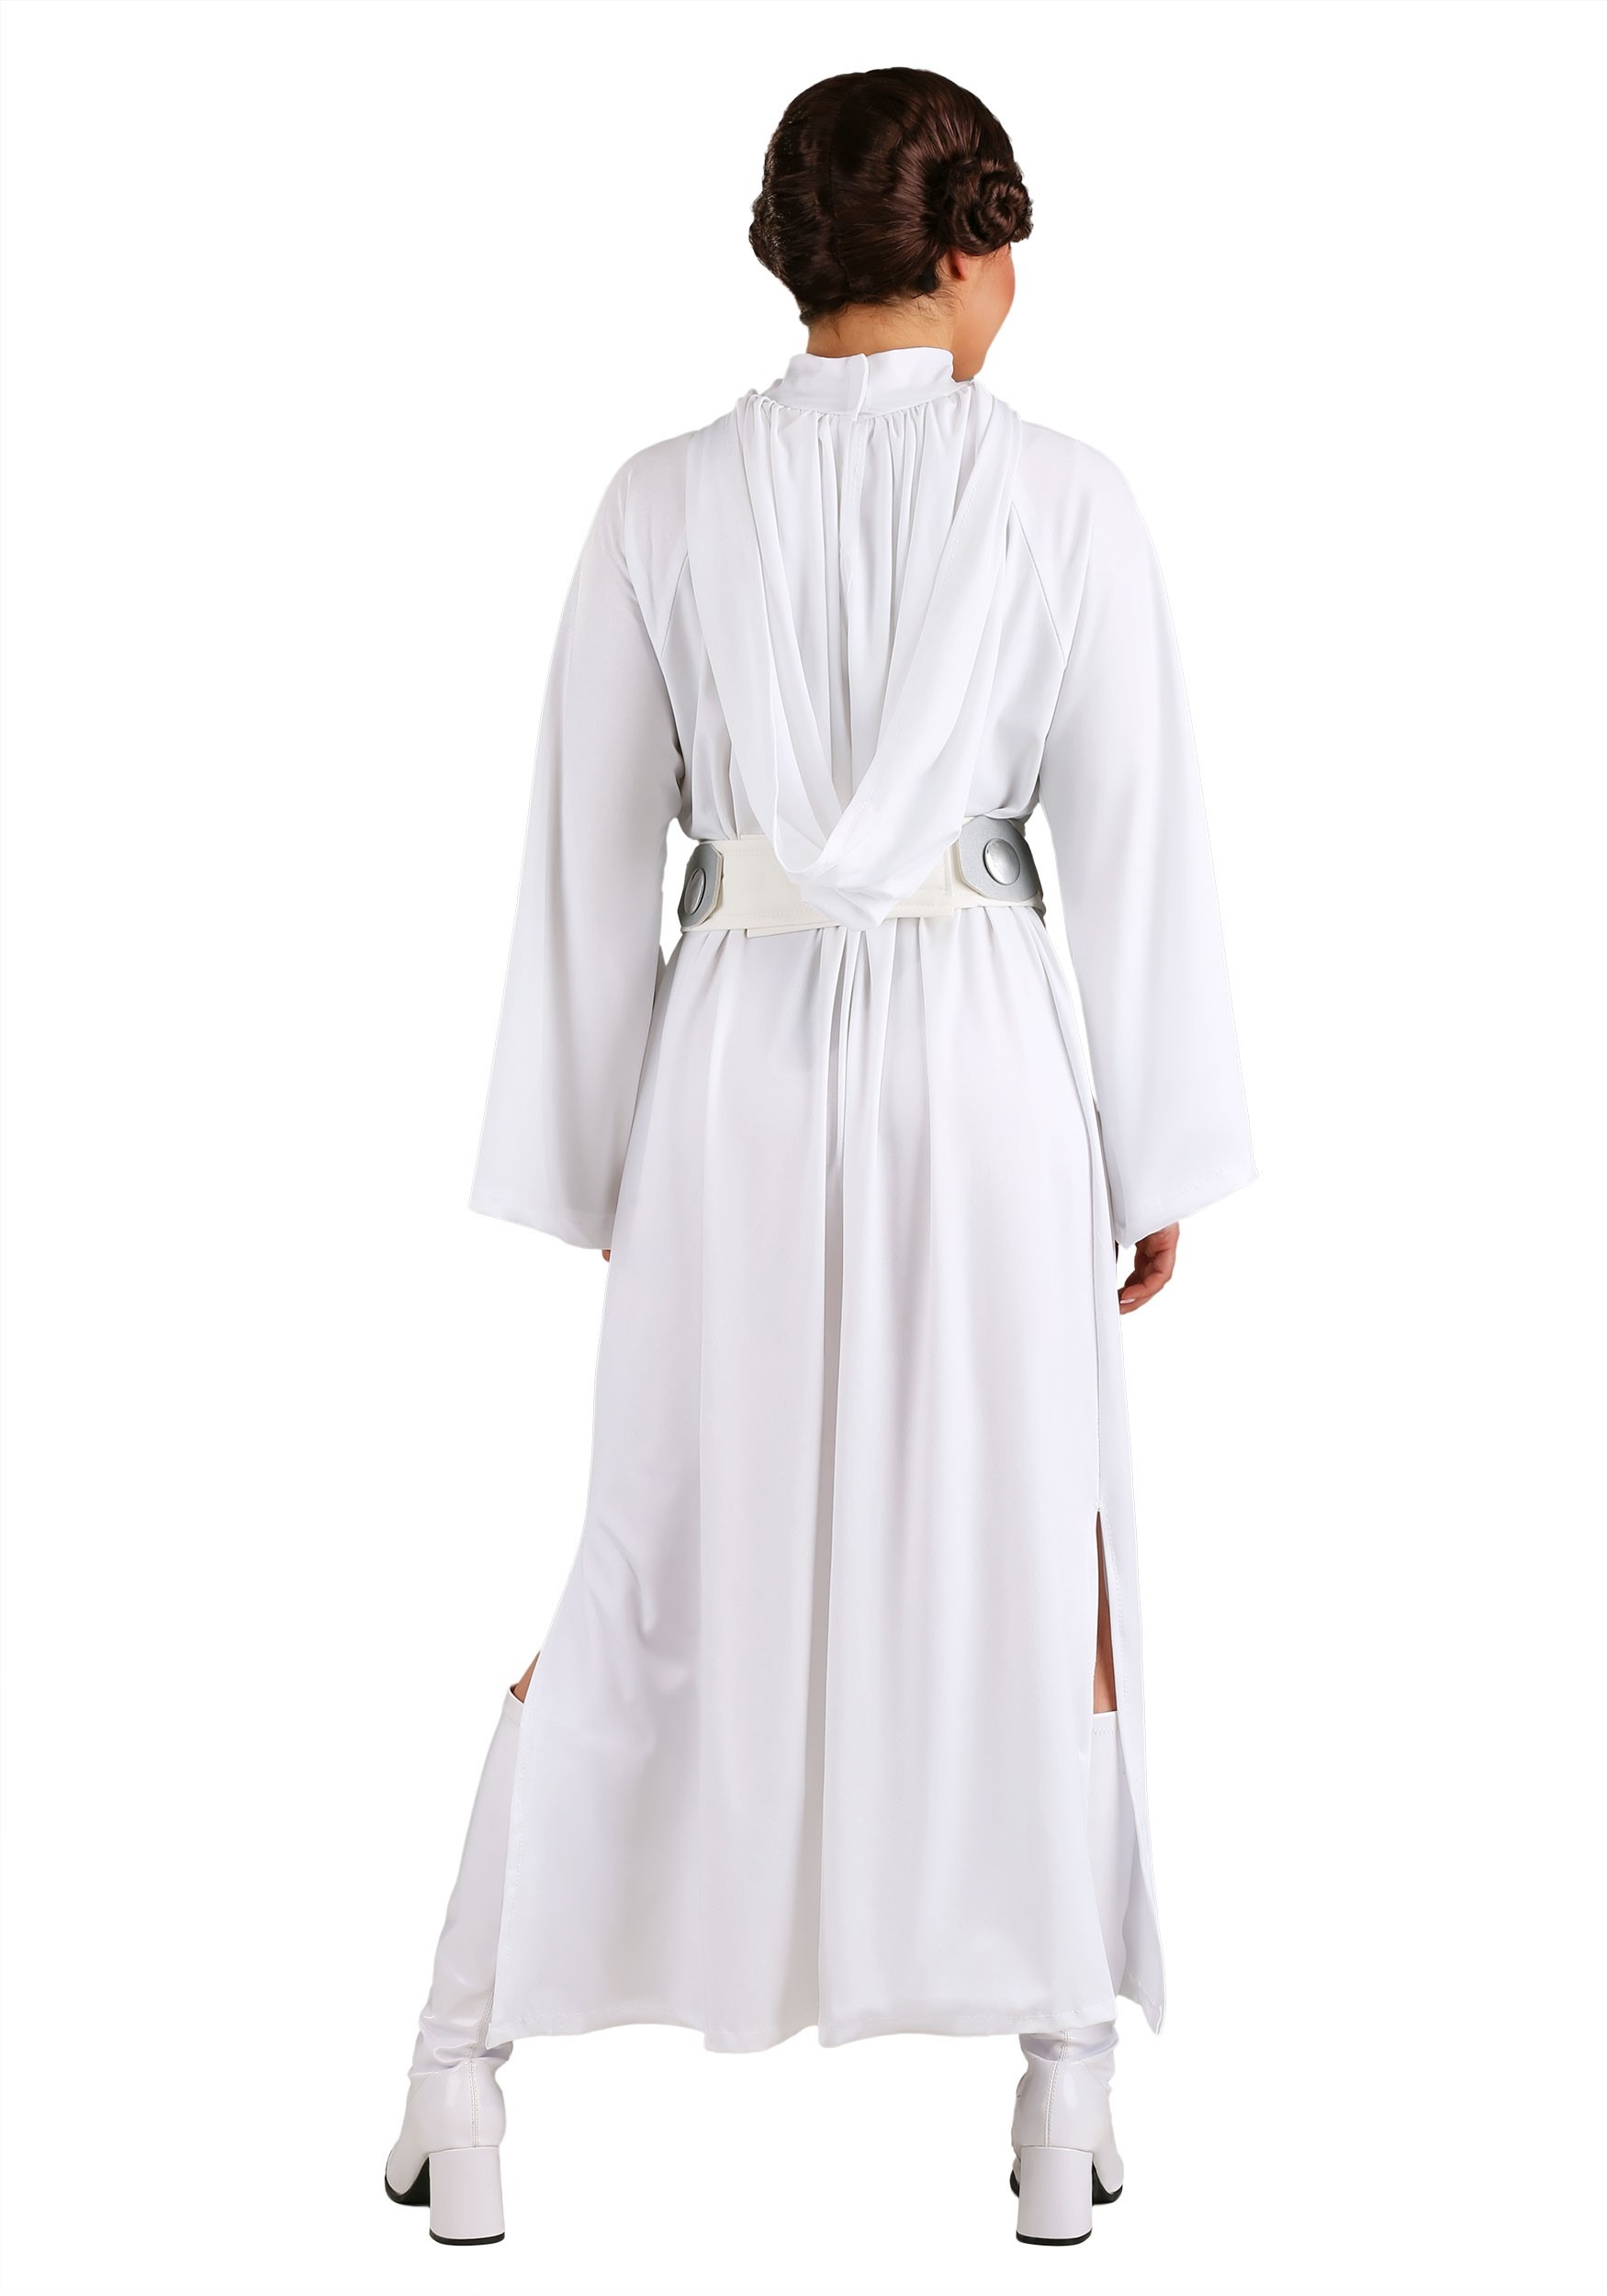 Deluxe Adult Princess Leia Costume